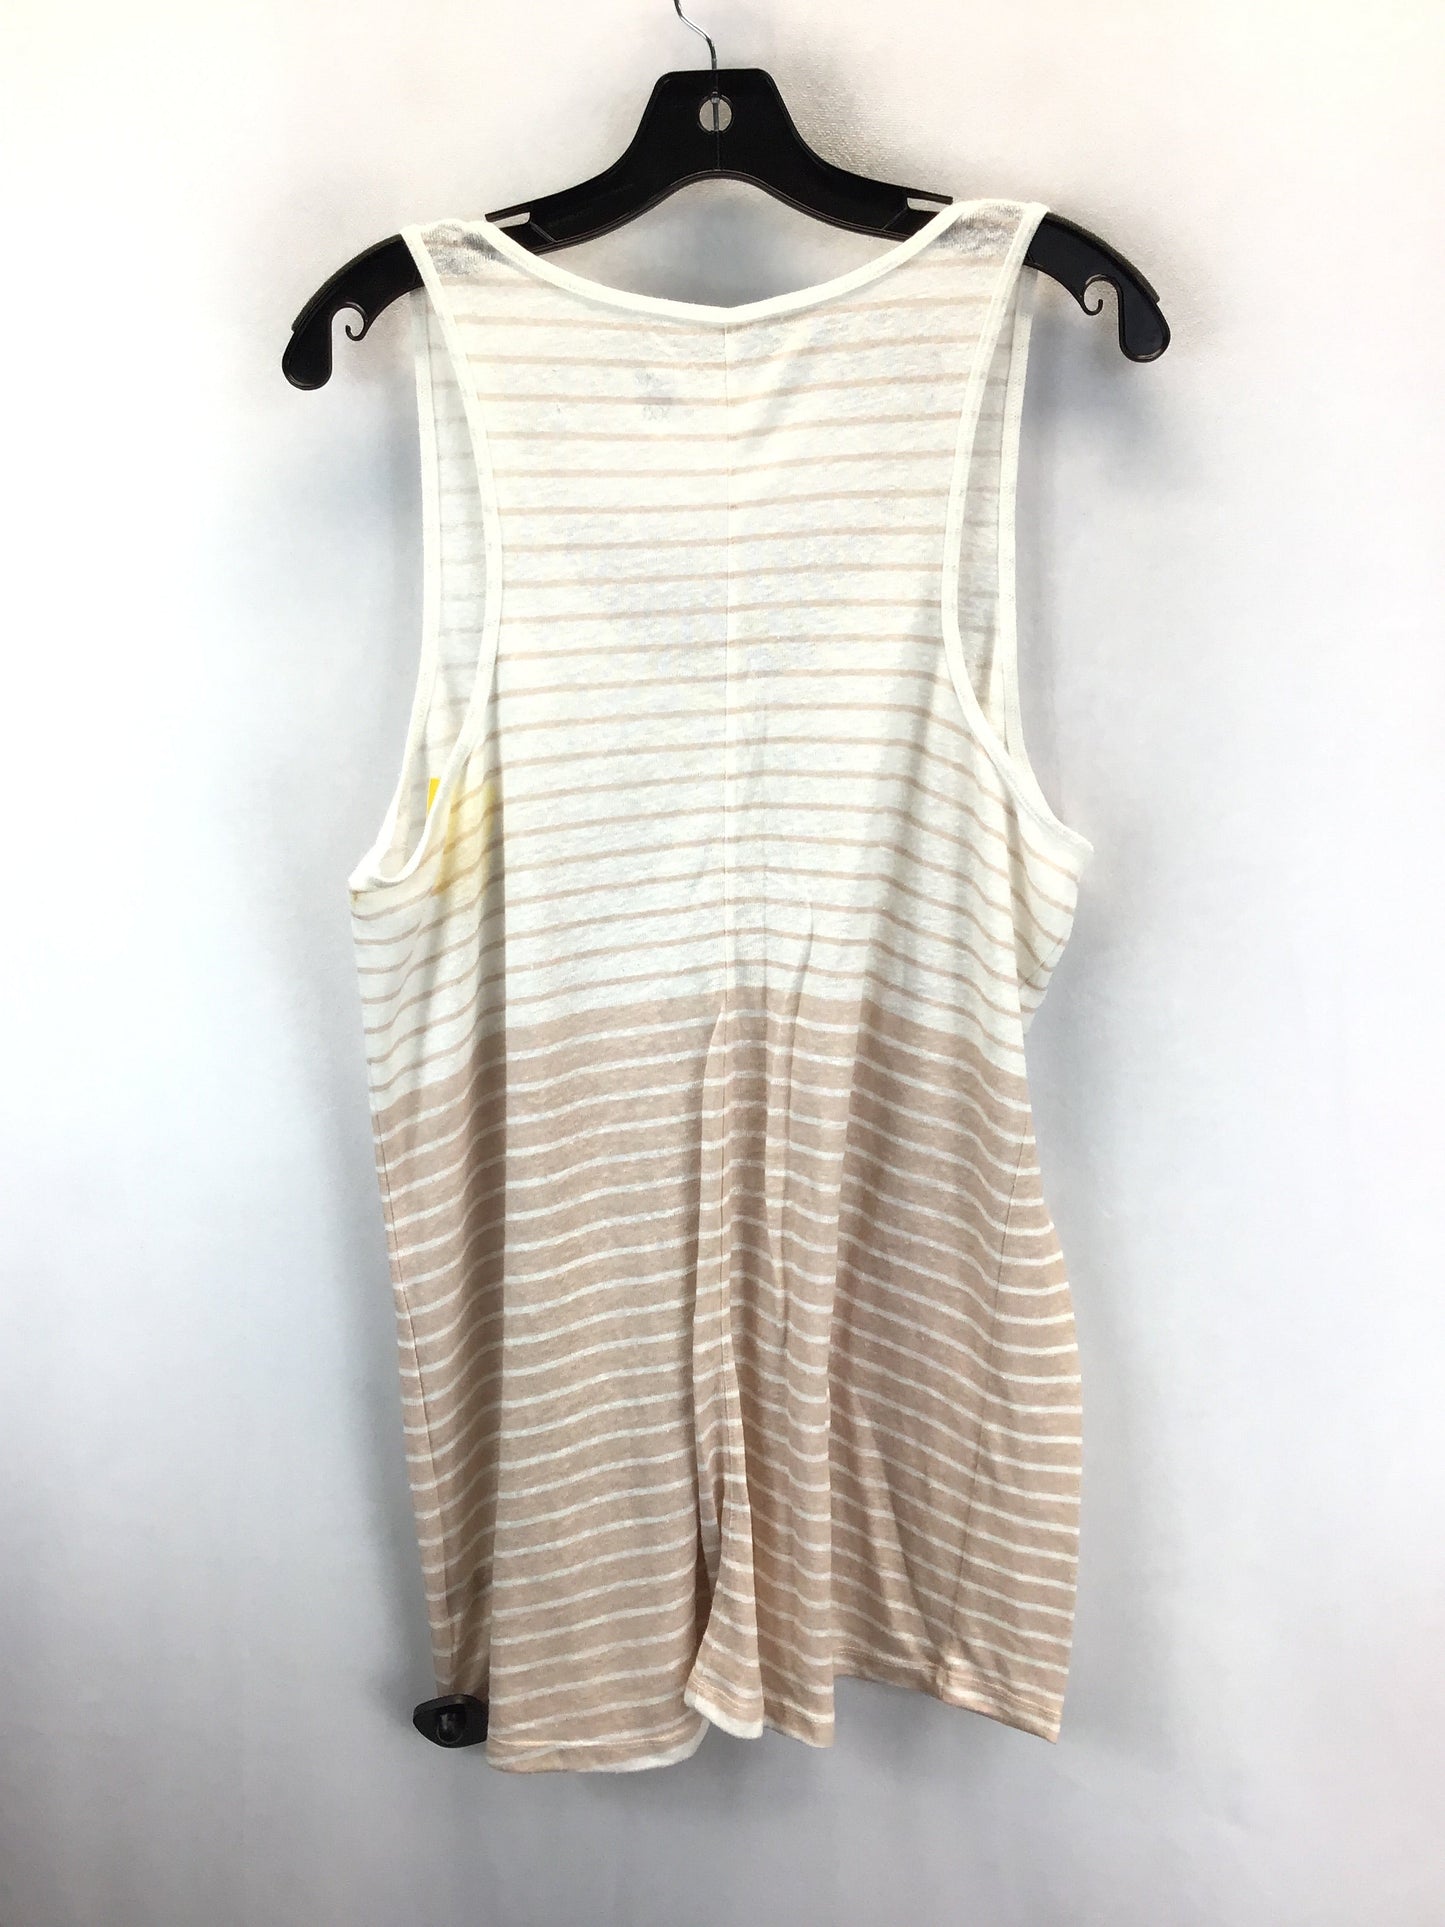 Top Sleeveless Basic By Mossimo  Size: Xxl